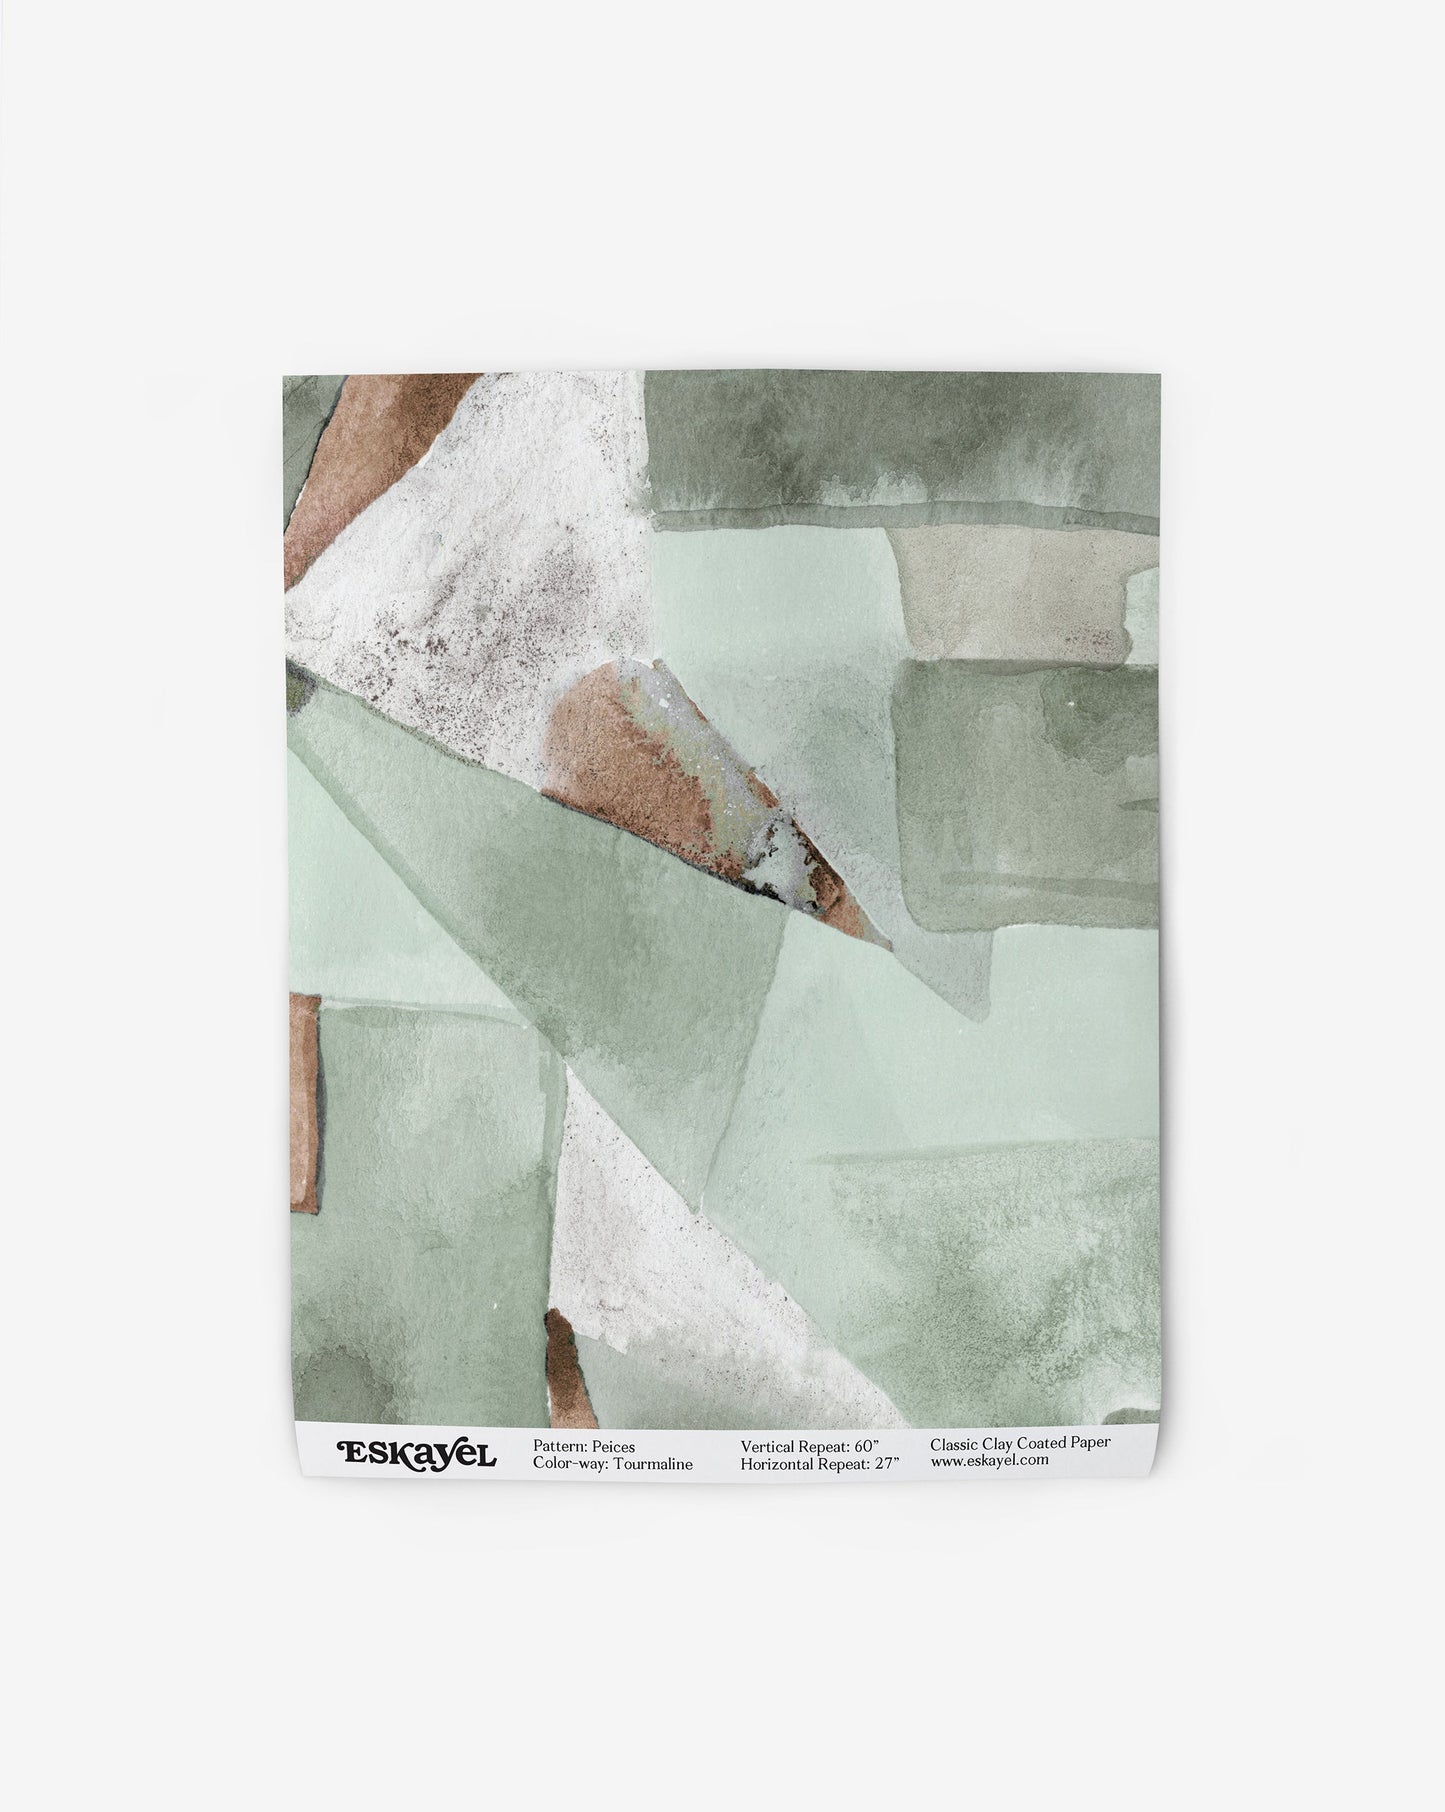 Our Pieces Wallpaper in Tourmaline has a design of colorblocked puzzle pieces in shades of green and a brown color throughout.   